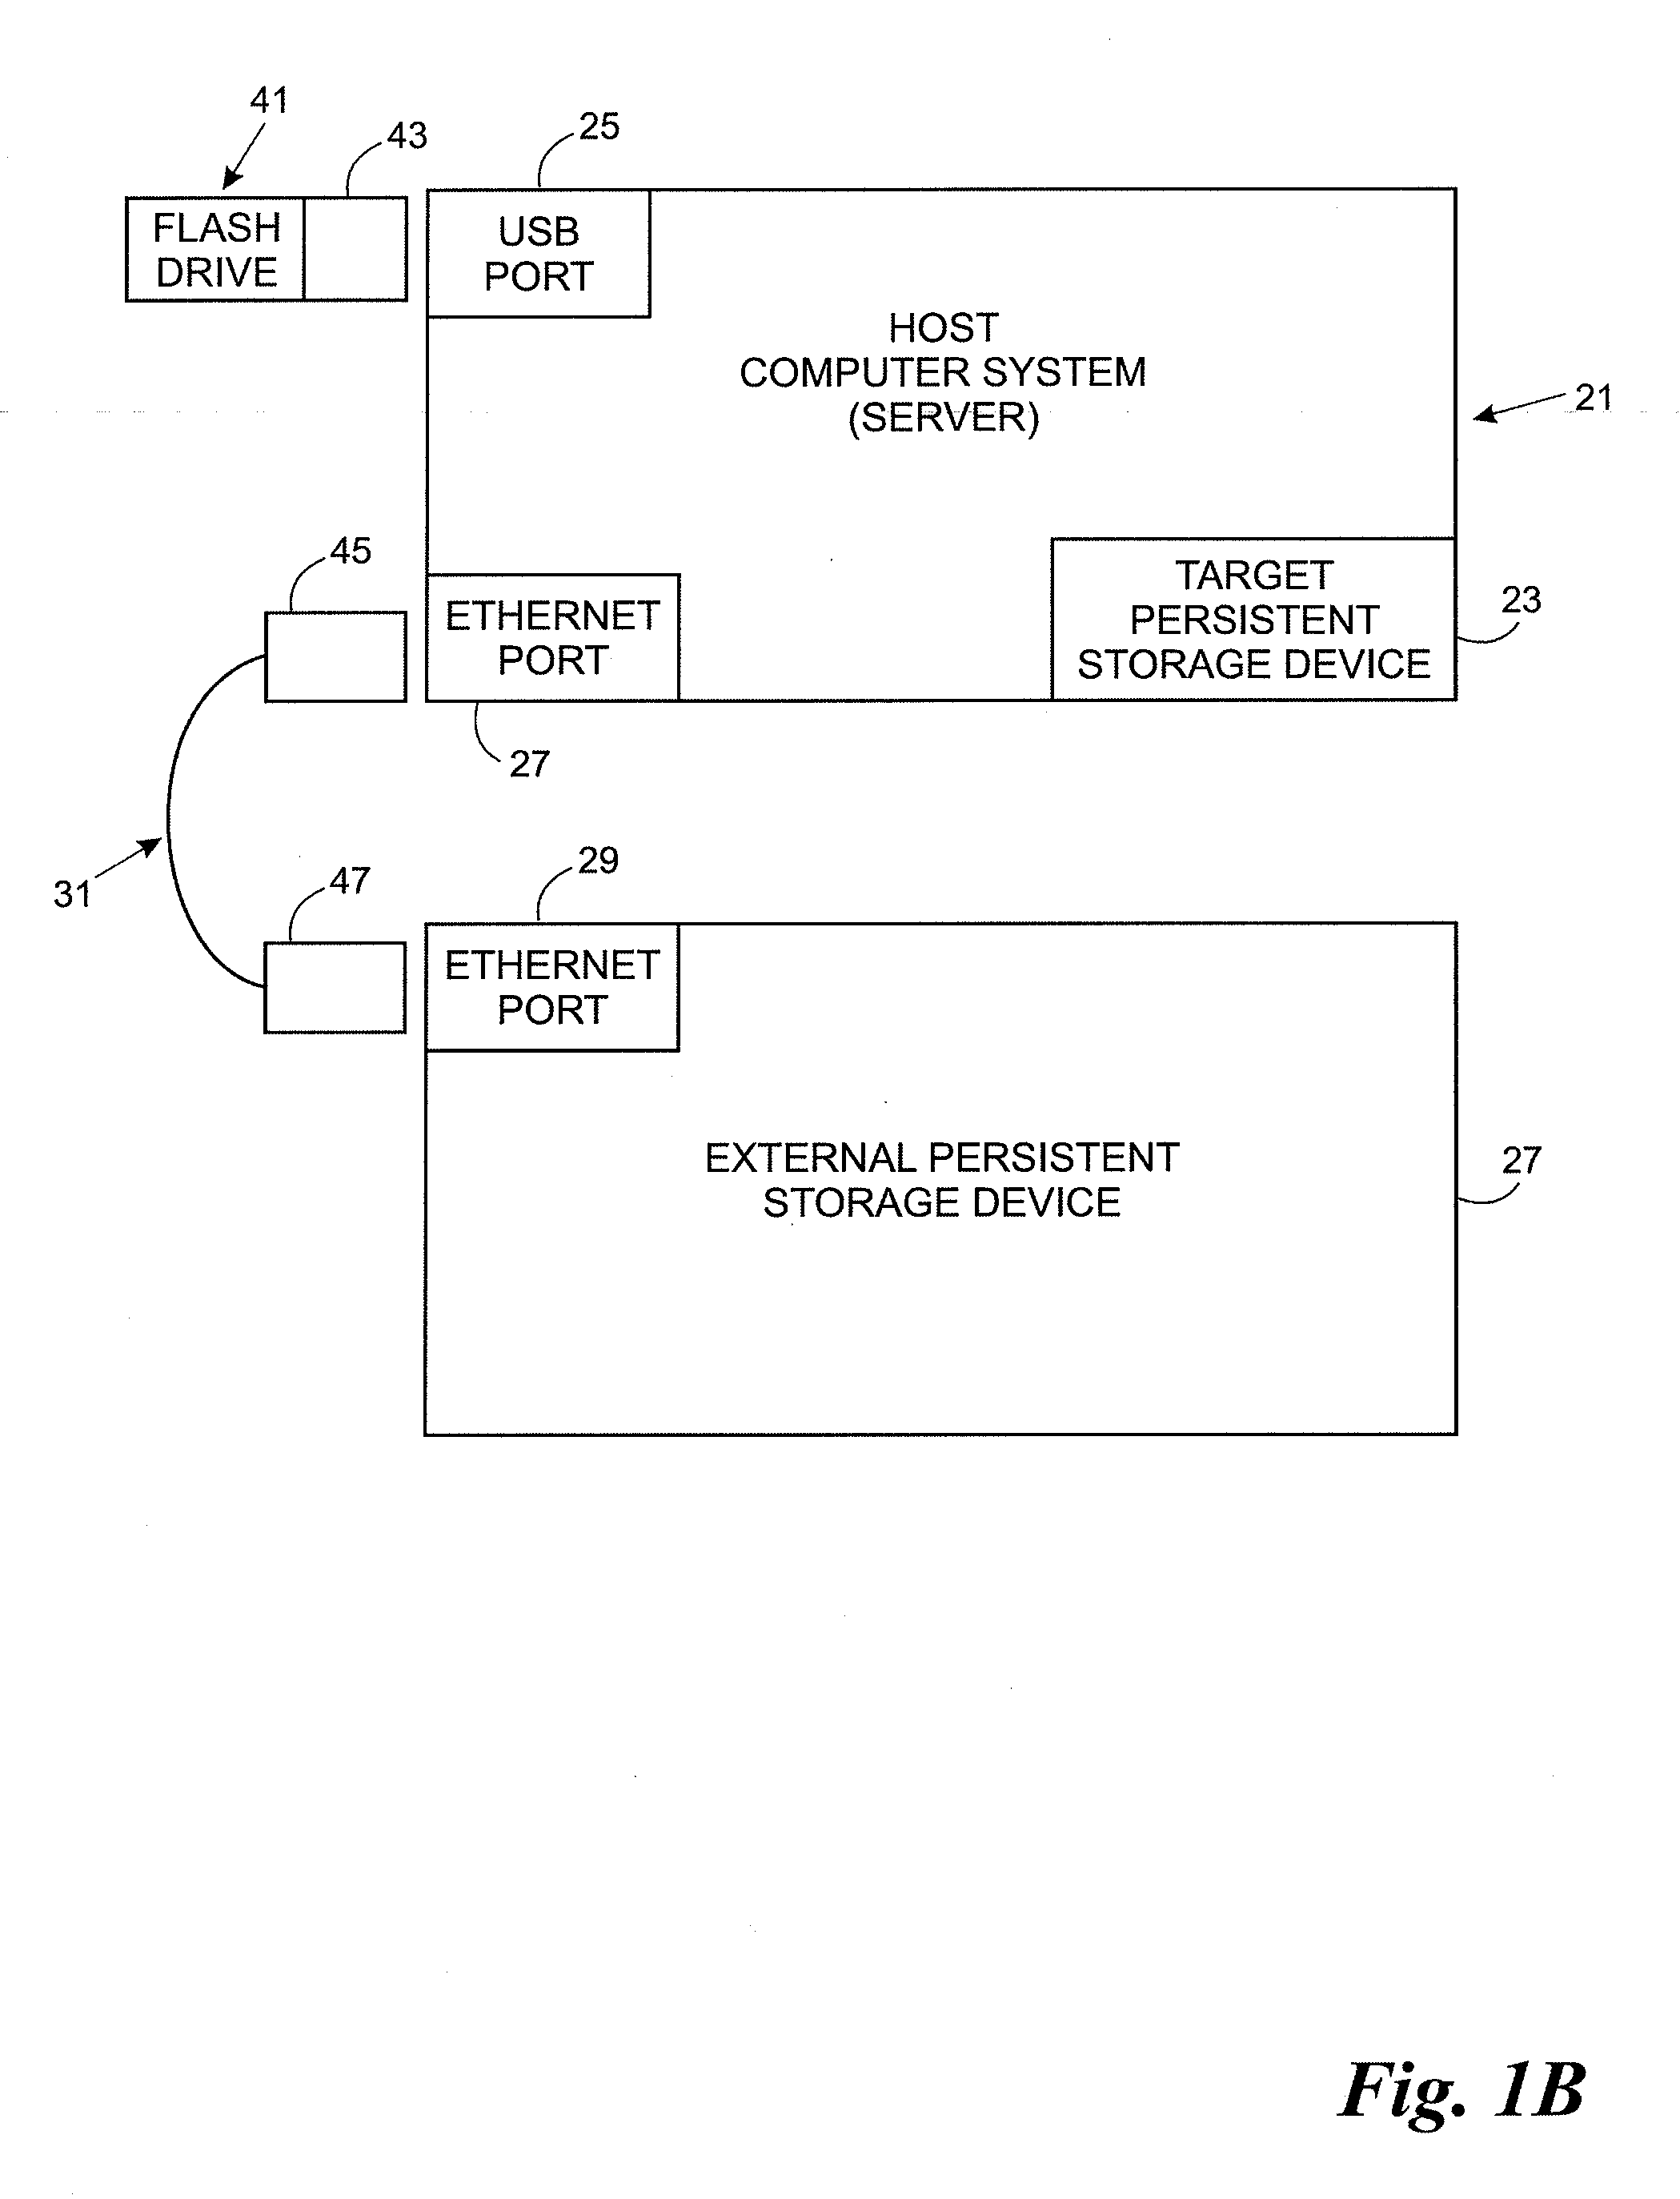 System and method for preserving electronically stored information